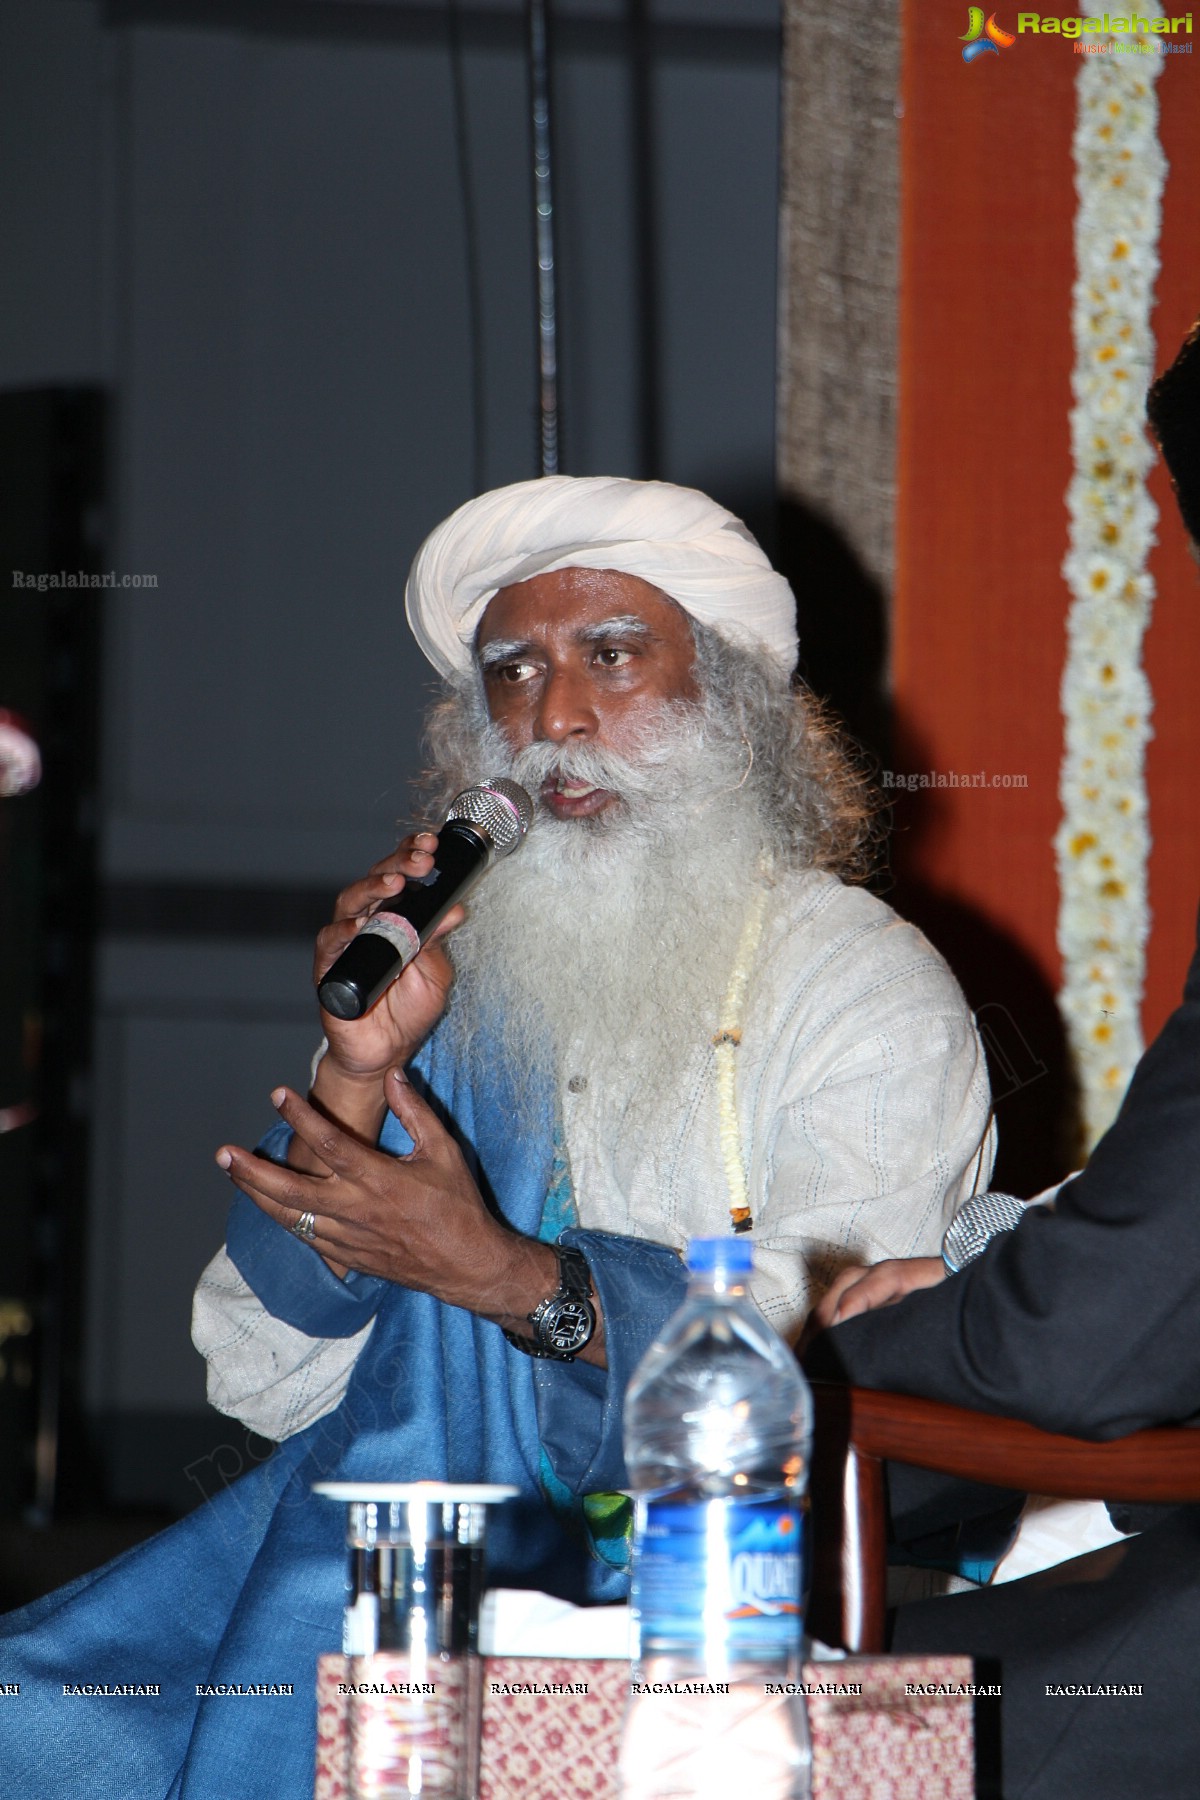 In Conversation with the Mystic - Actor Siddharth with Sadhguru